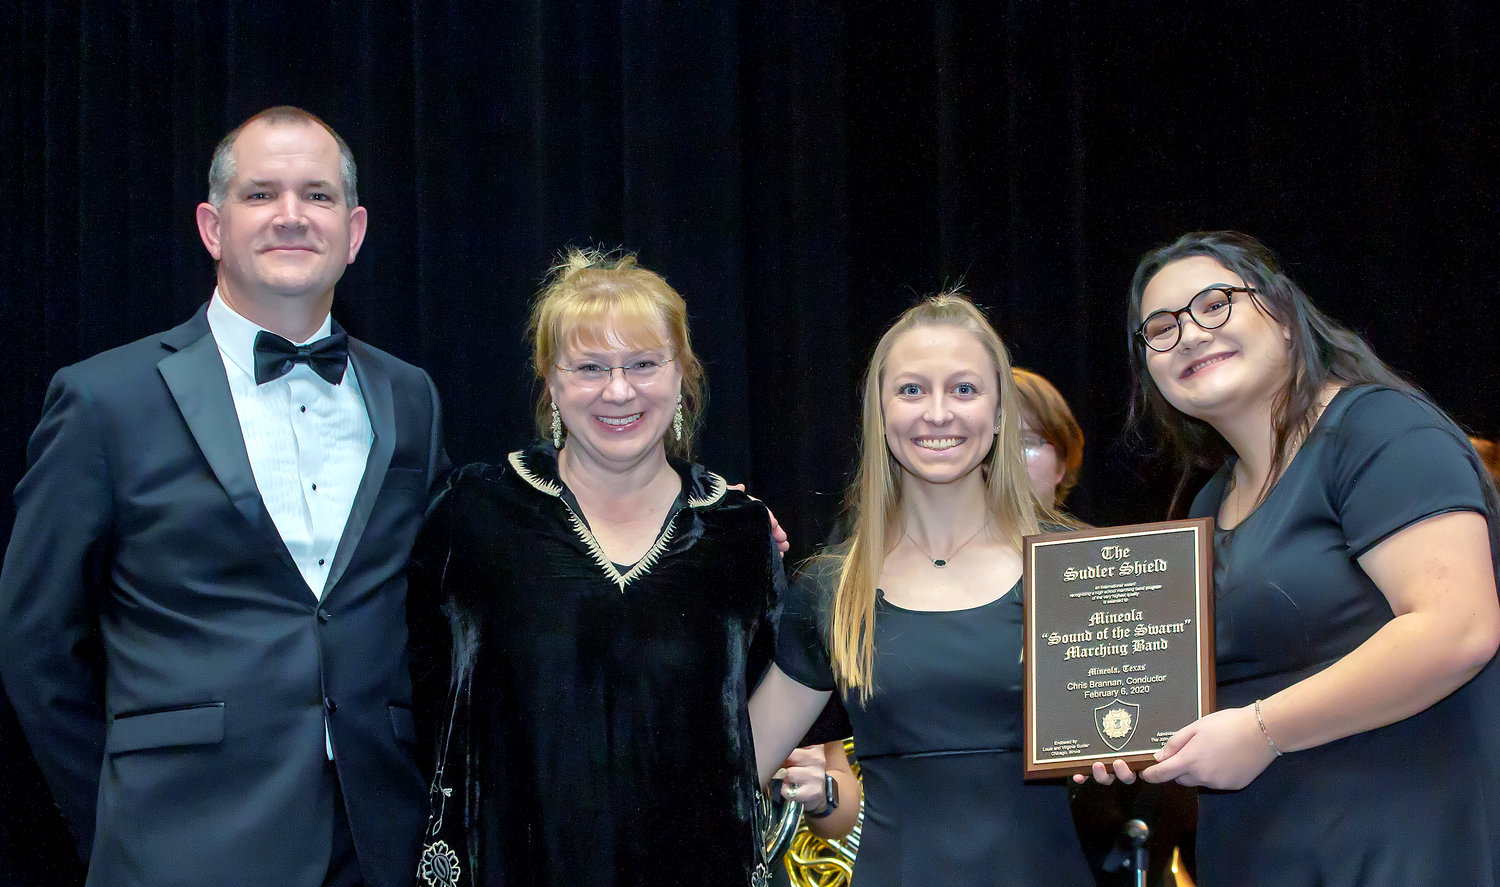 The Mineola High School Sound of the Swarm band was officially presented the Sudler Shield, a prestigious national award, during last Thursday’s performance in Lindale, when the band played the concert that it will give this week at the Texas Music Educators Association convention in San Antonio as the state honor band. Two members will also take part in all-state band clinics and concerts. Shown, from left, Director Chris Brannan, presenter Amanda Drinkwater-fine arts director for Lewisville ISD and drum majors Tristan Kirk and Emily Phonsnasinh.